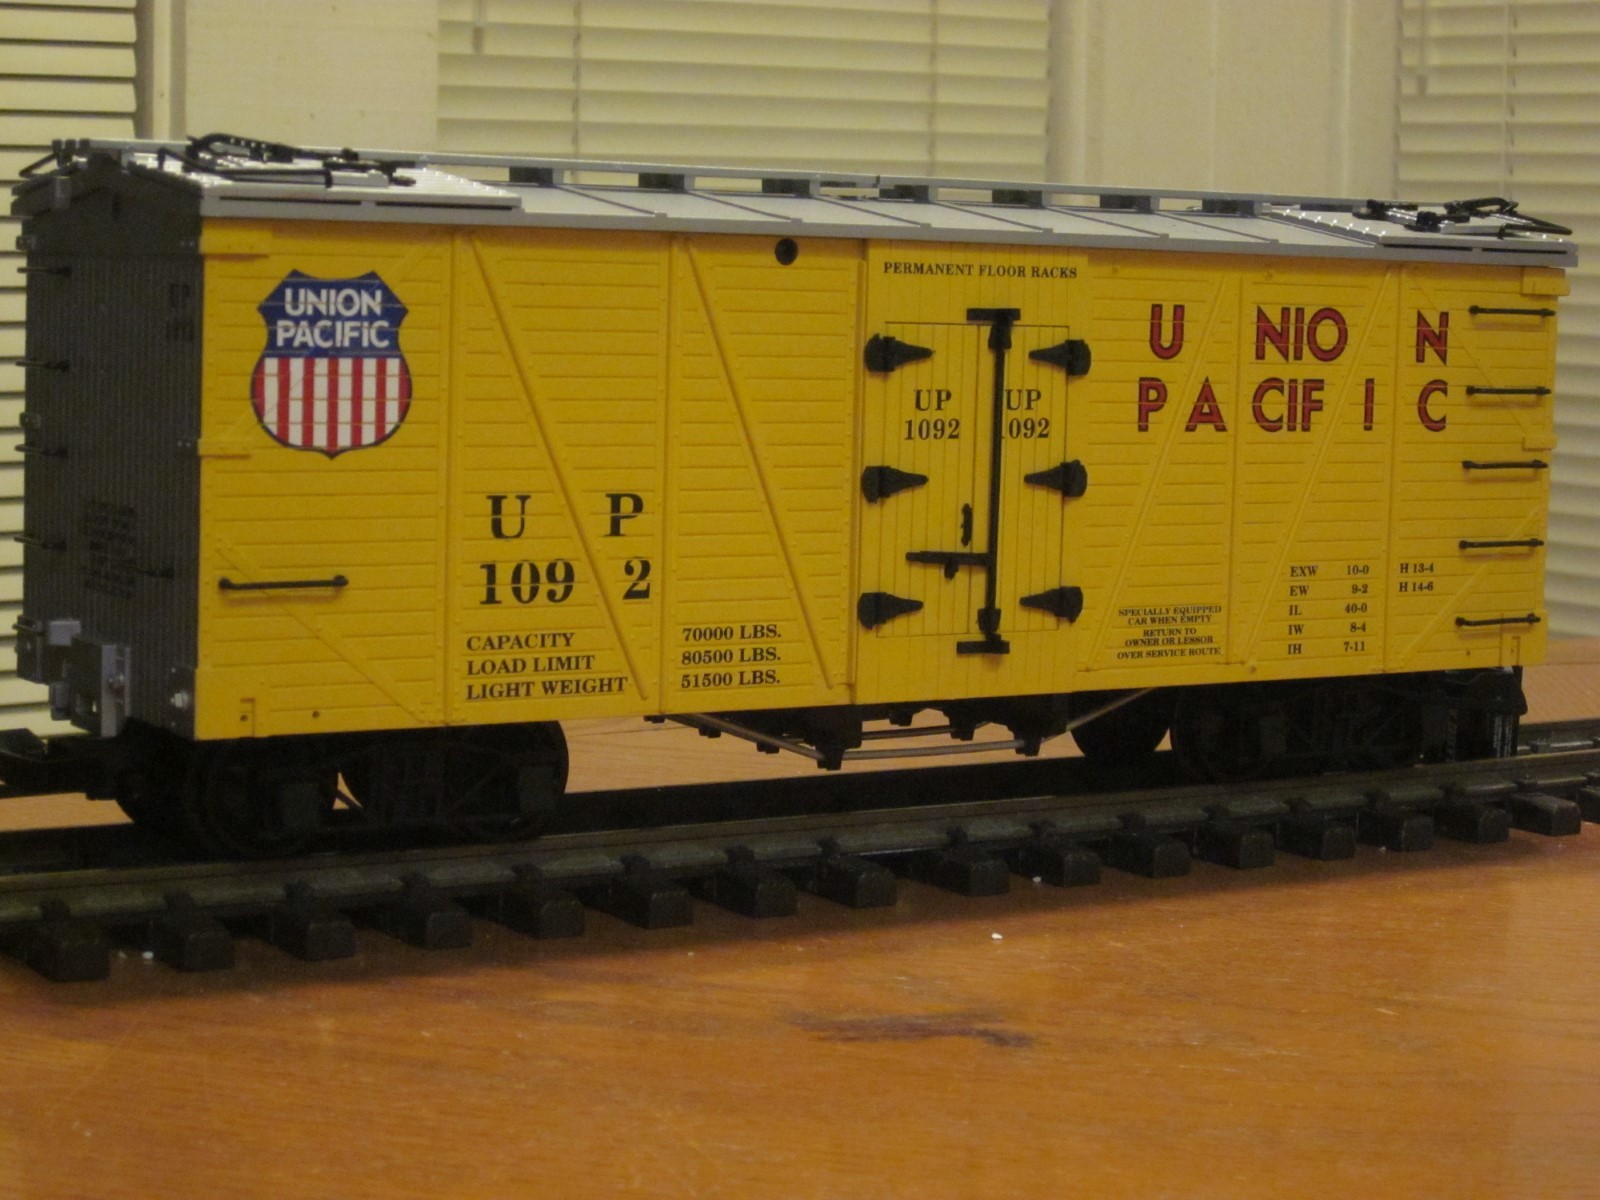 R15016 Union Pacific UP 1092